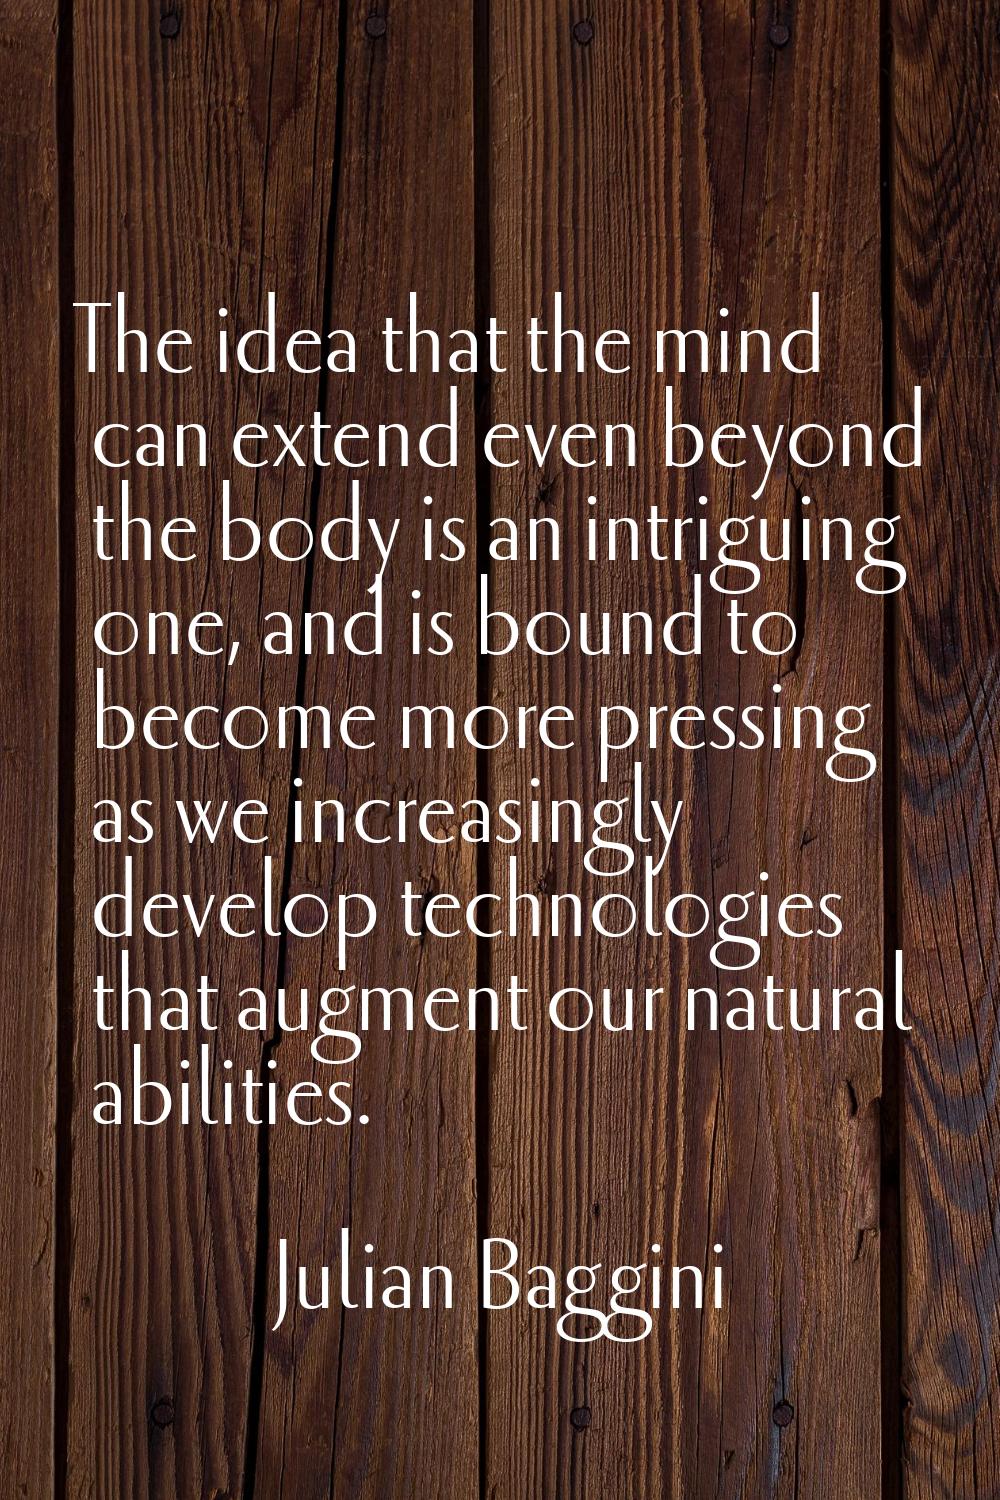 The idea that the mind can extend even beyond the body is an intriguing one, and is bound to become